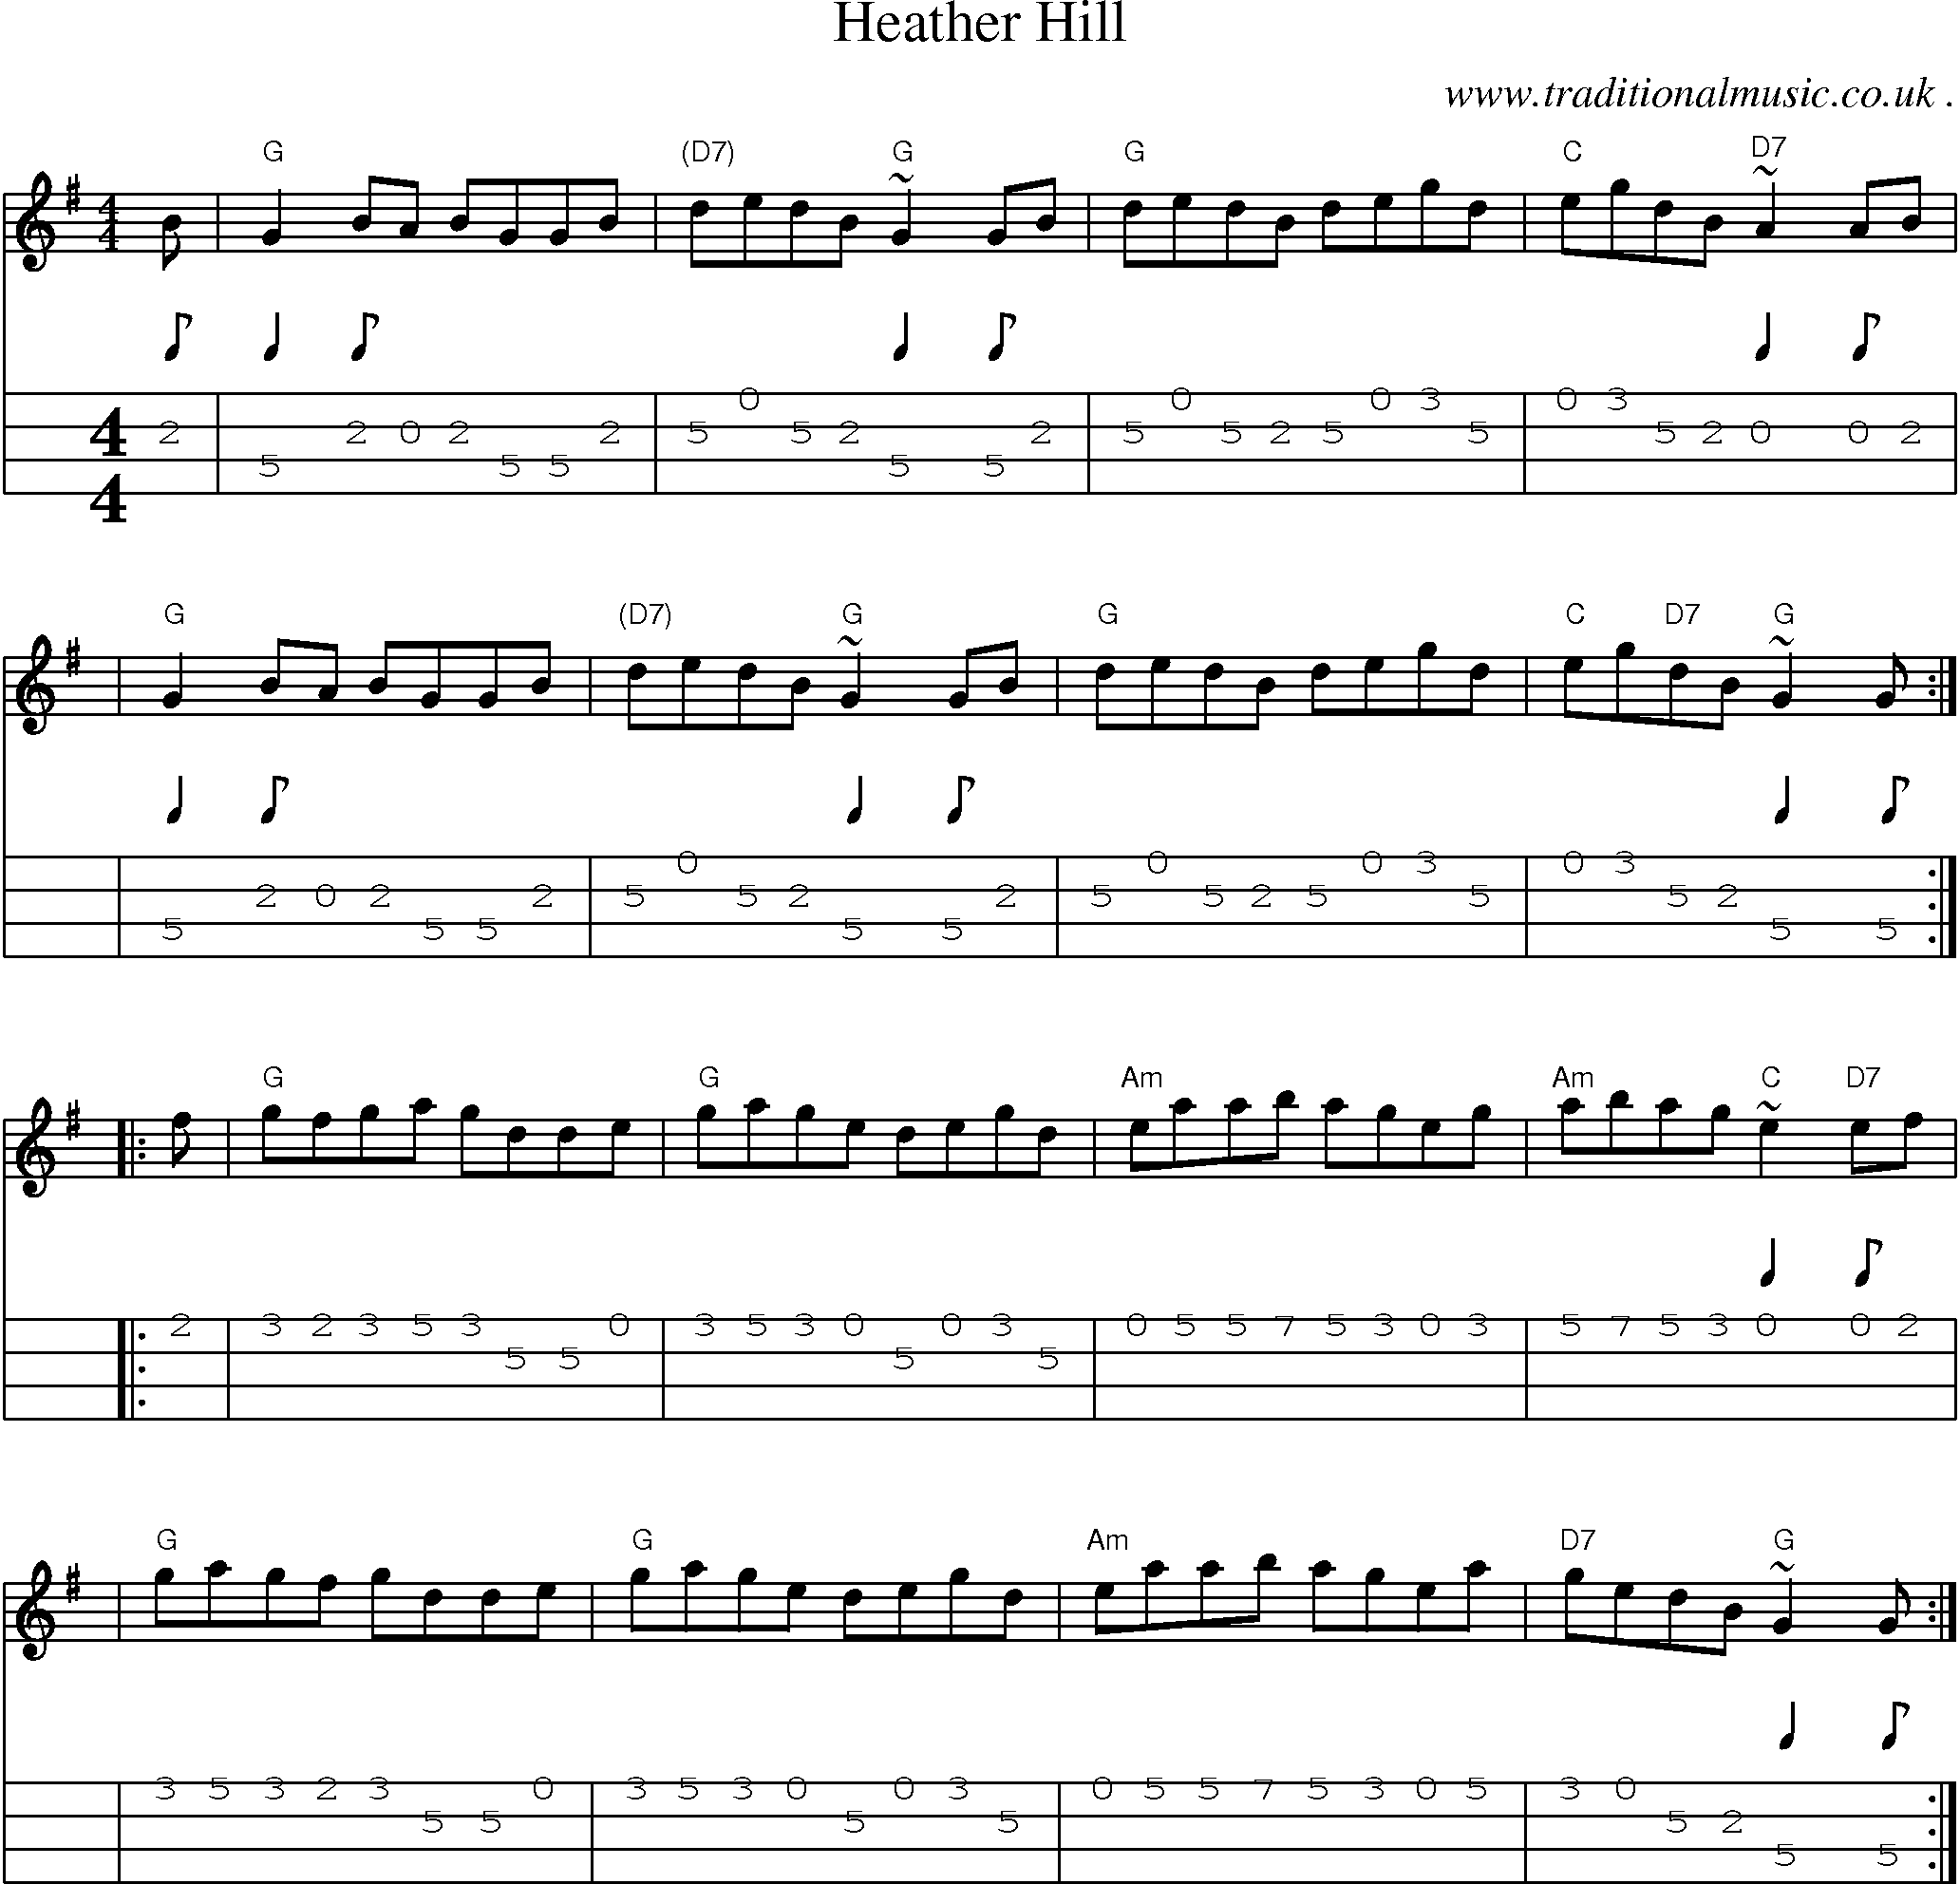 Sheet-music  score, Chords and Mandolin Tabs for Heather Hill